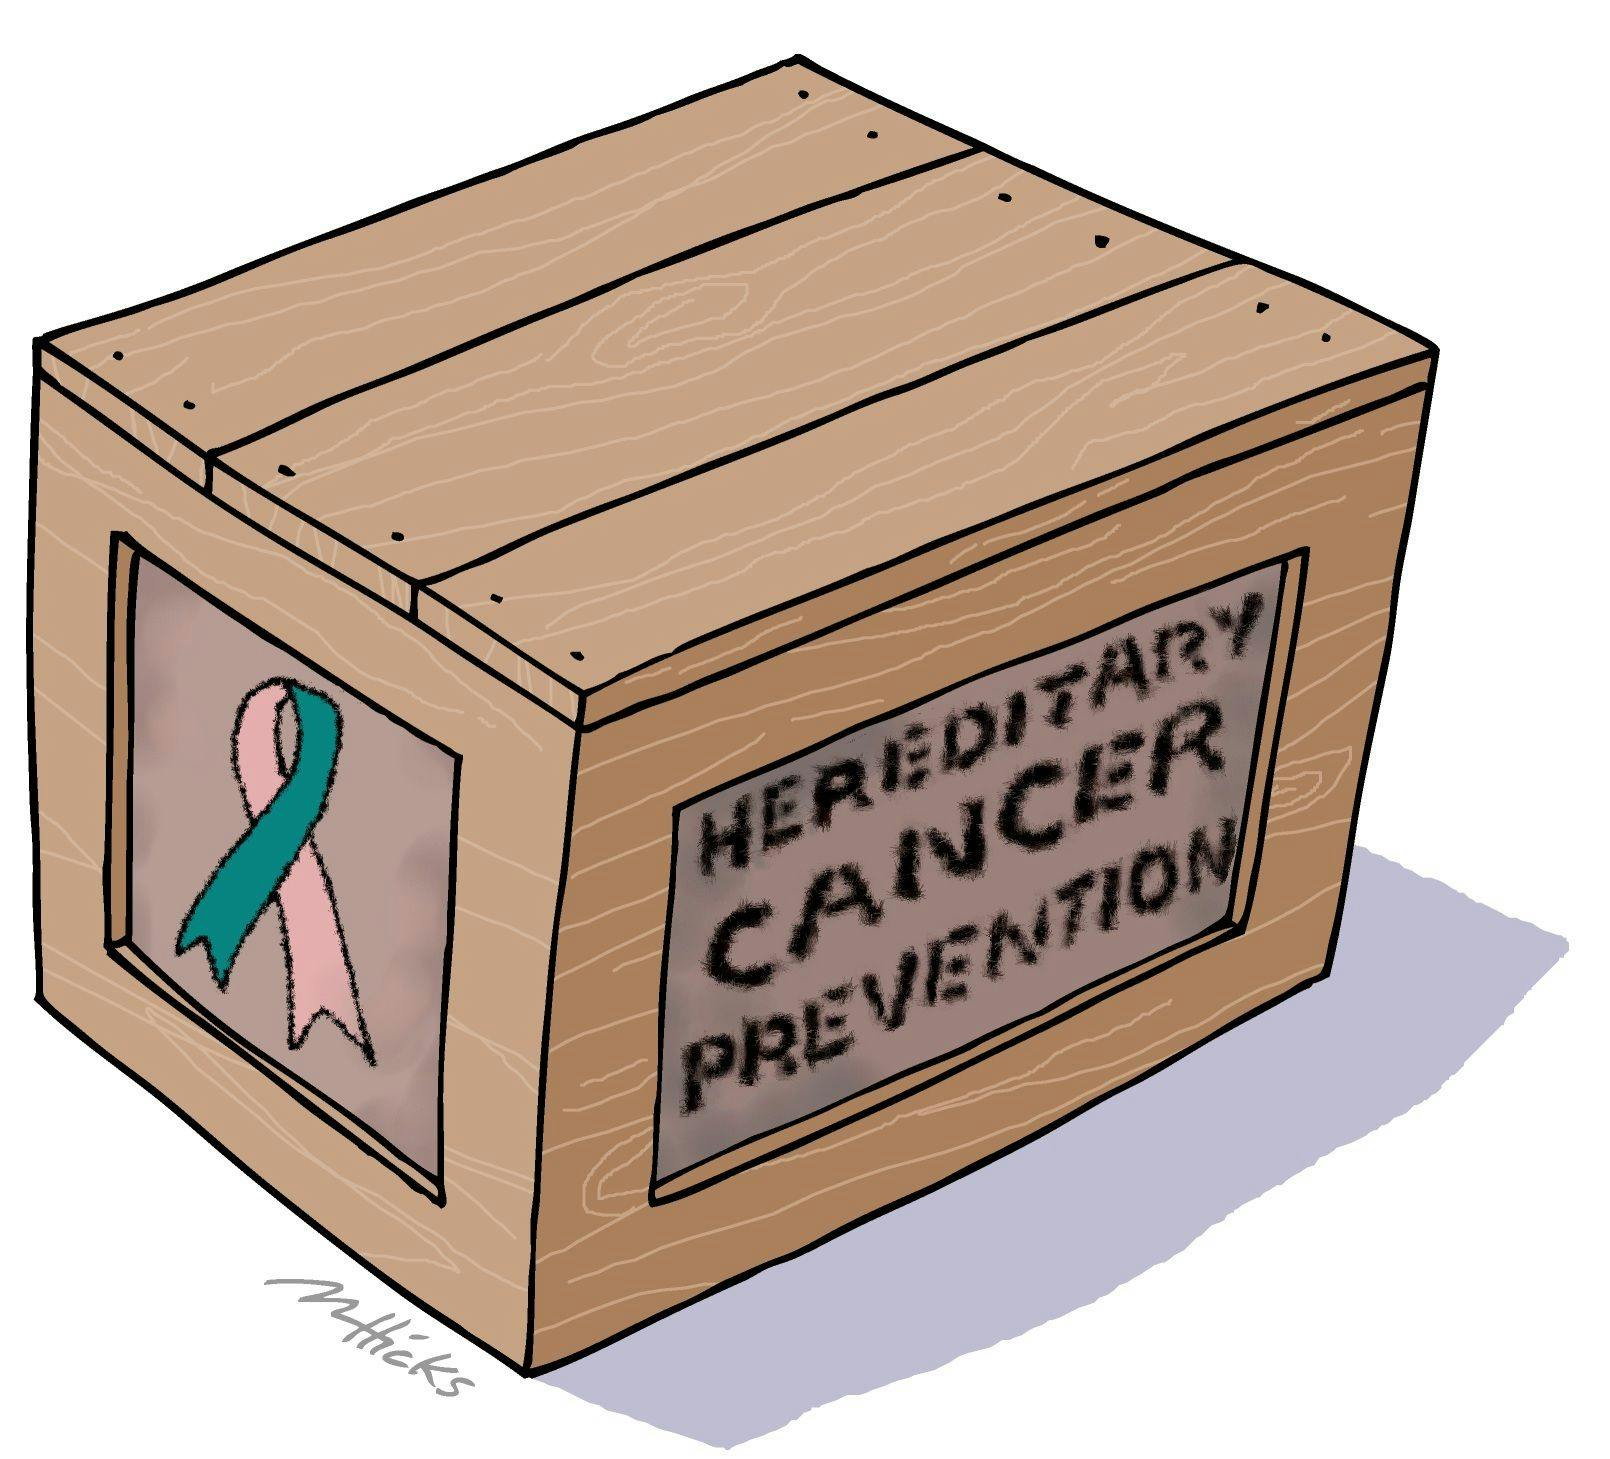 Drawing of a box with a cancer ribbon on one side and "hereditary cancer prevention" written on the other